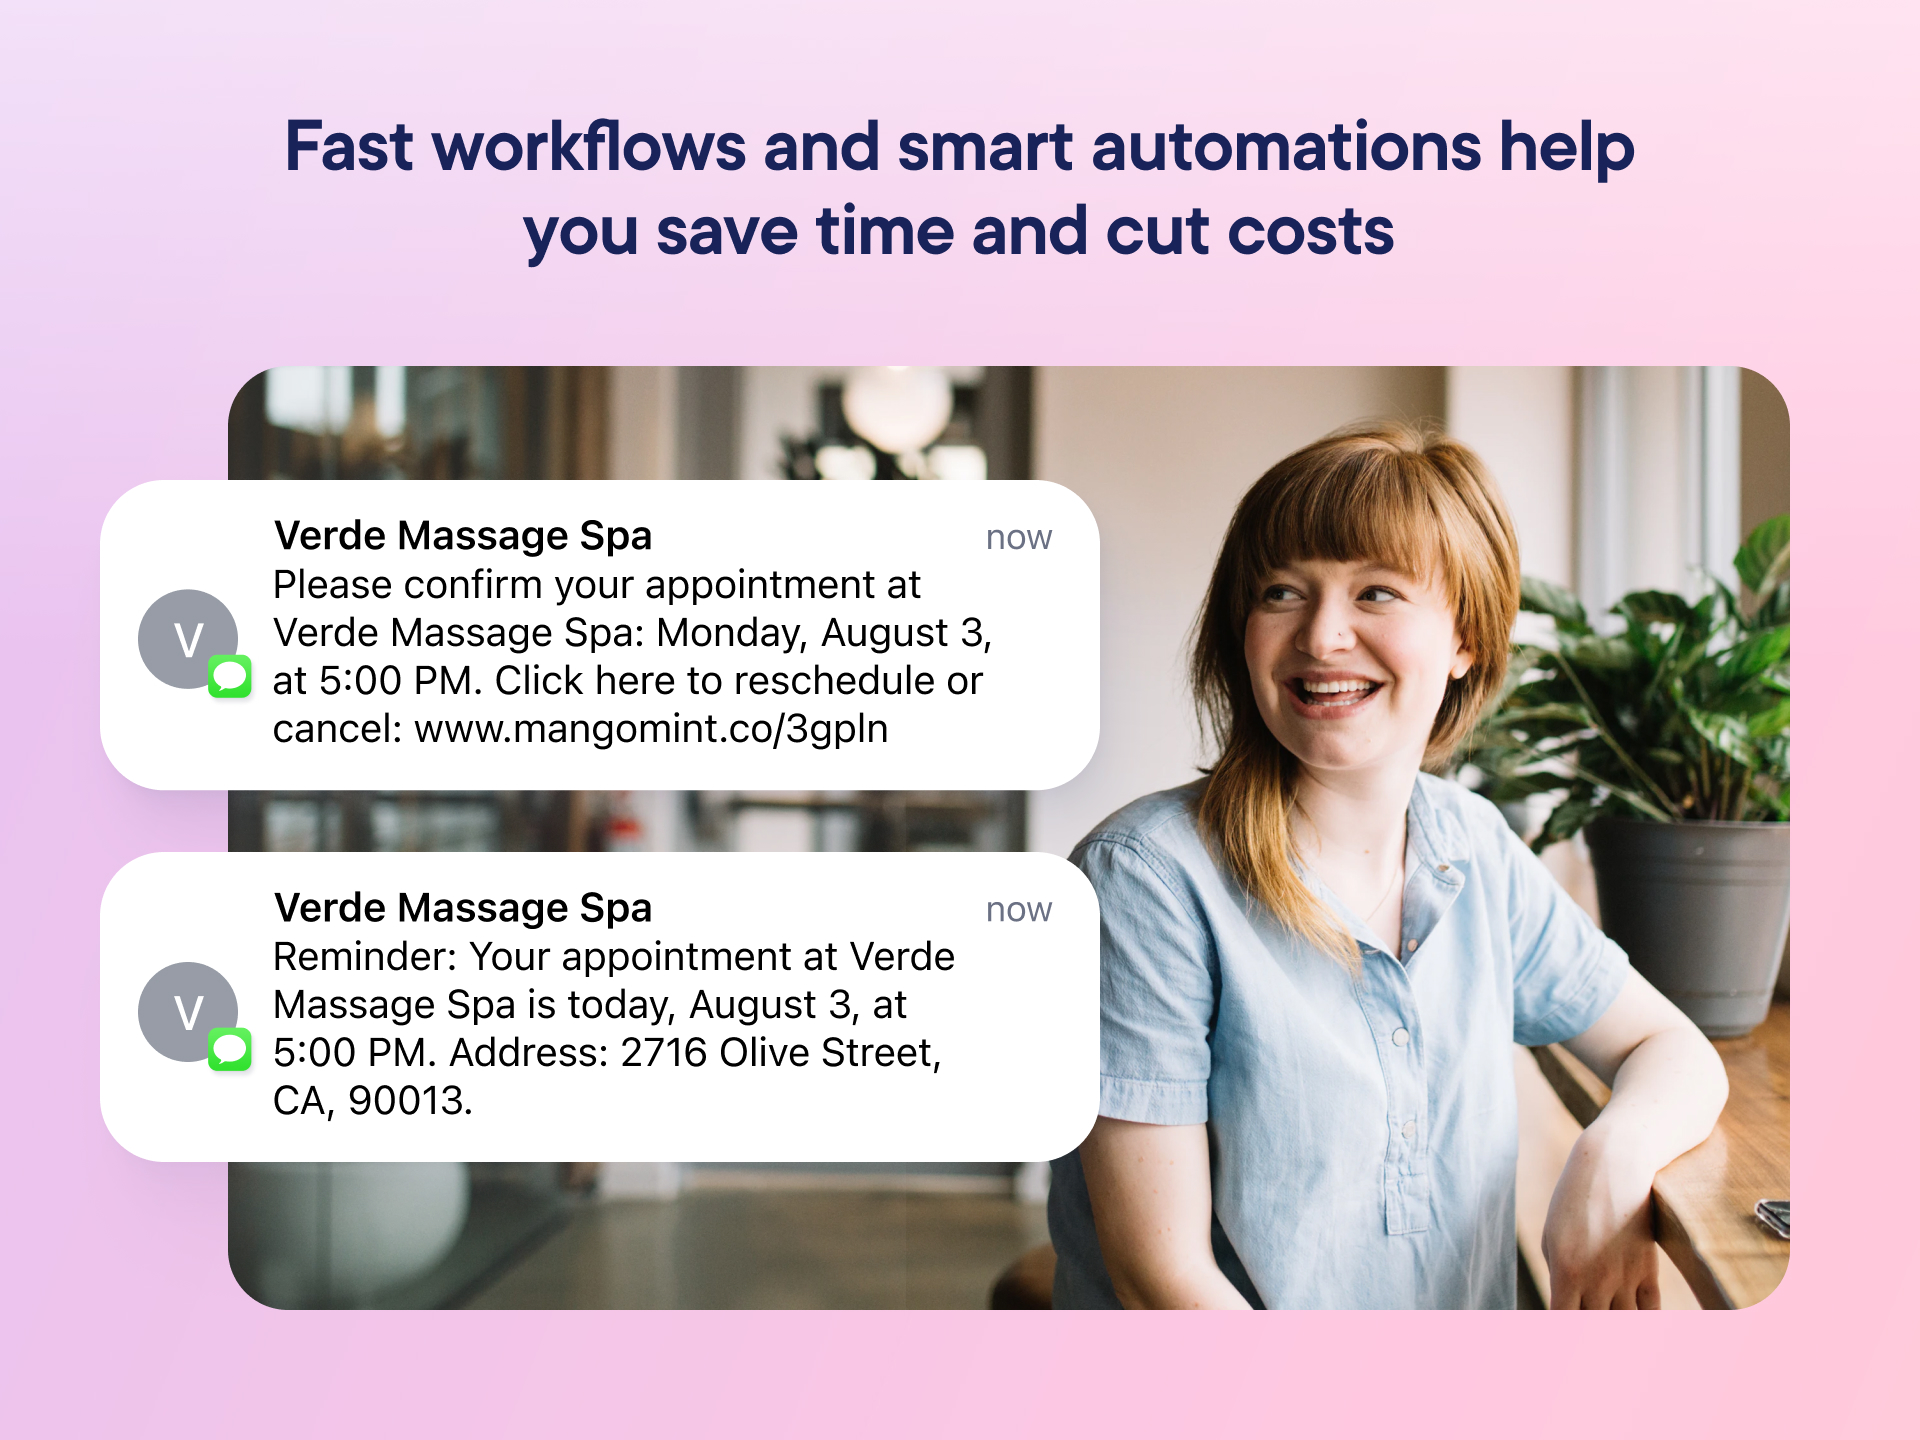 Fast workflows and smart automations help you save time and cut cost.